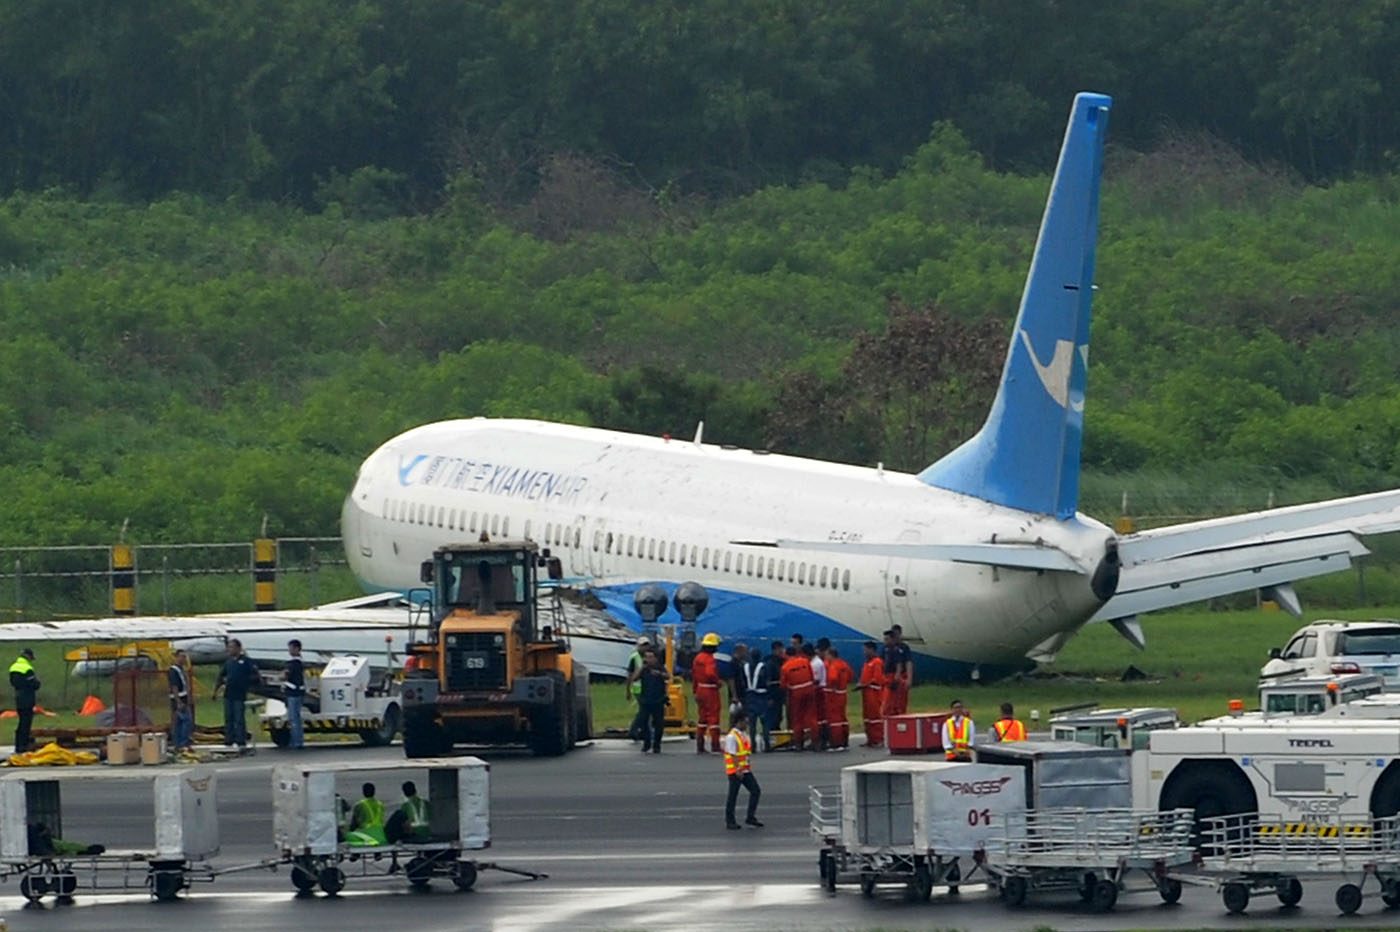 Xiamen Air says sorry days after runway mishap